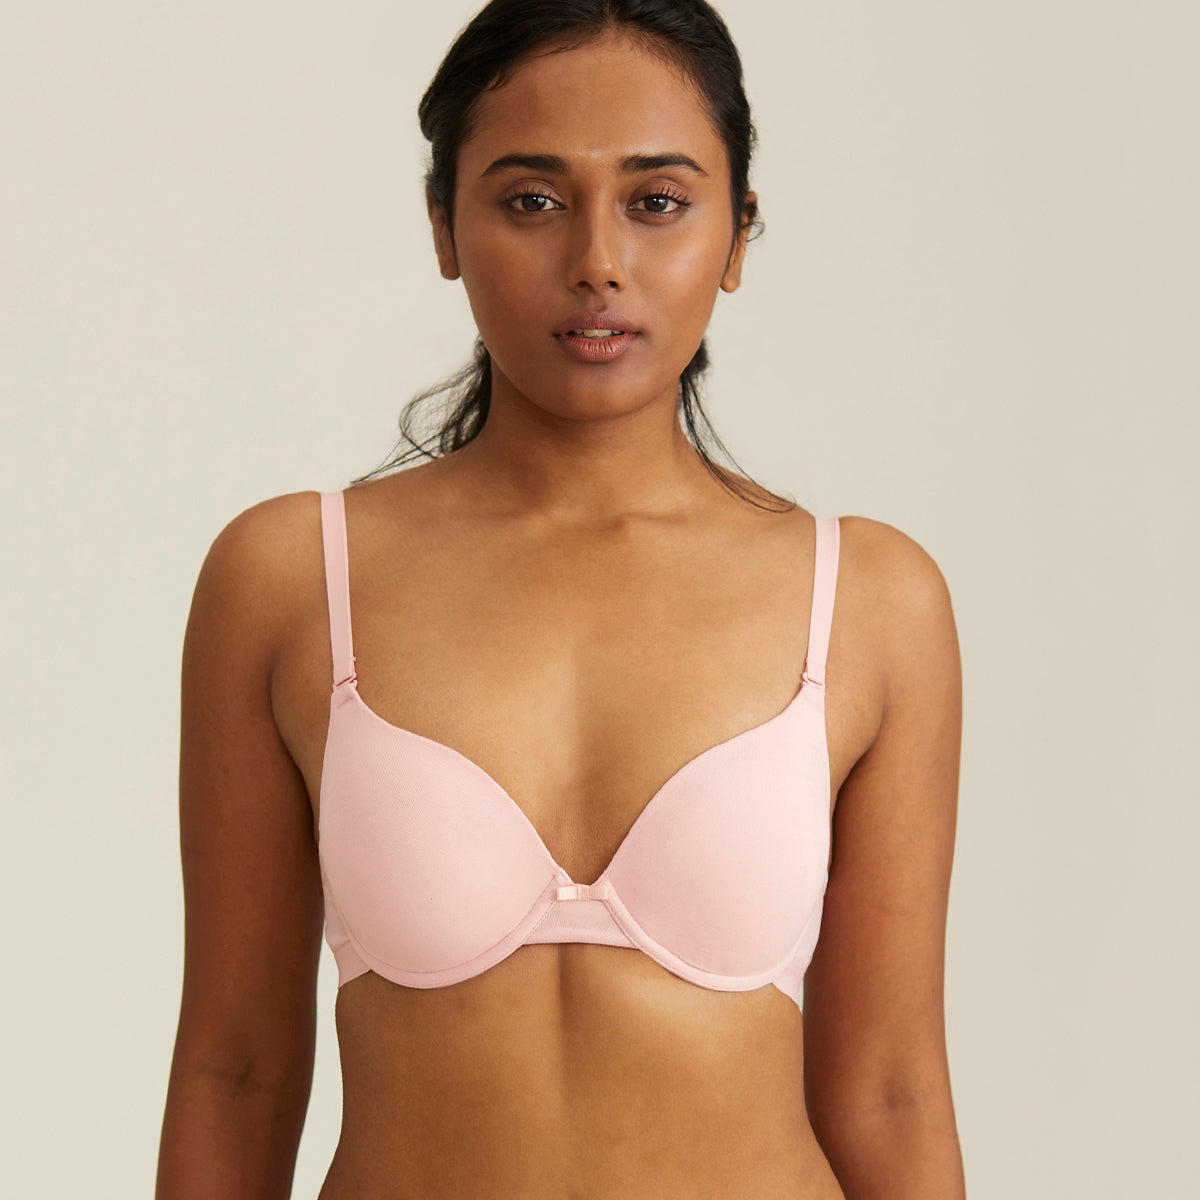 Breathe Cotton Padded wired Push up level-2 bra Demi coverage - Pink NYB005